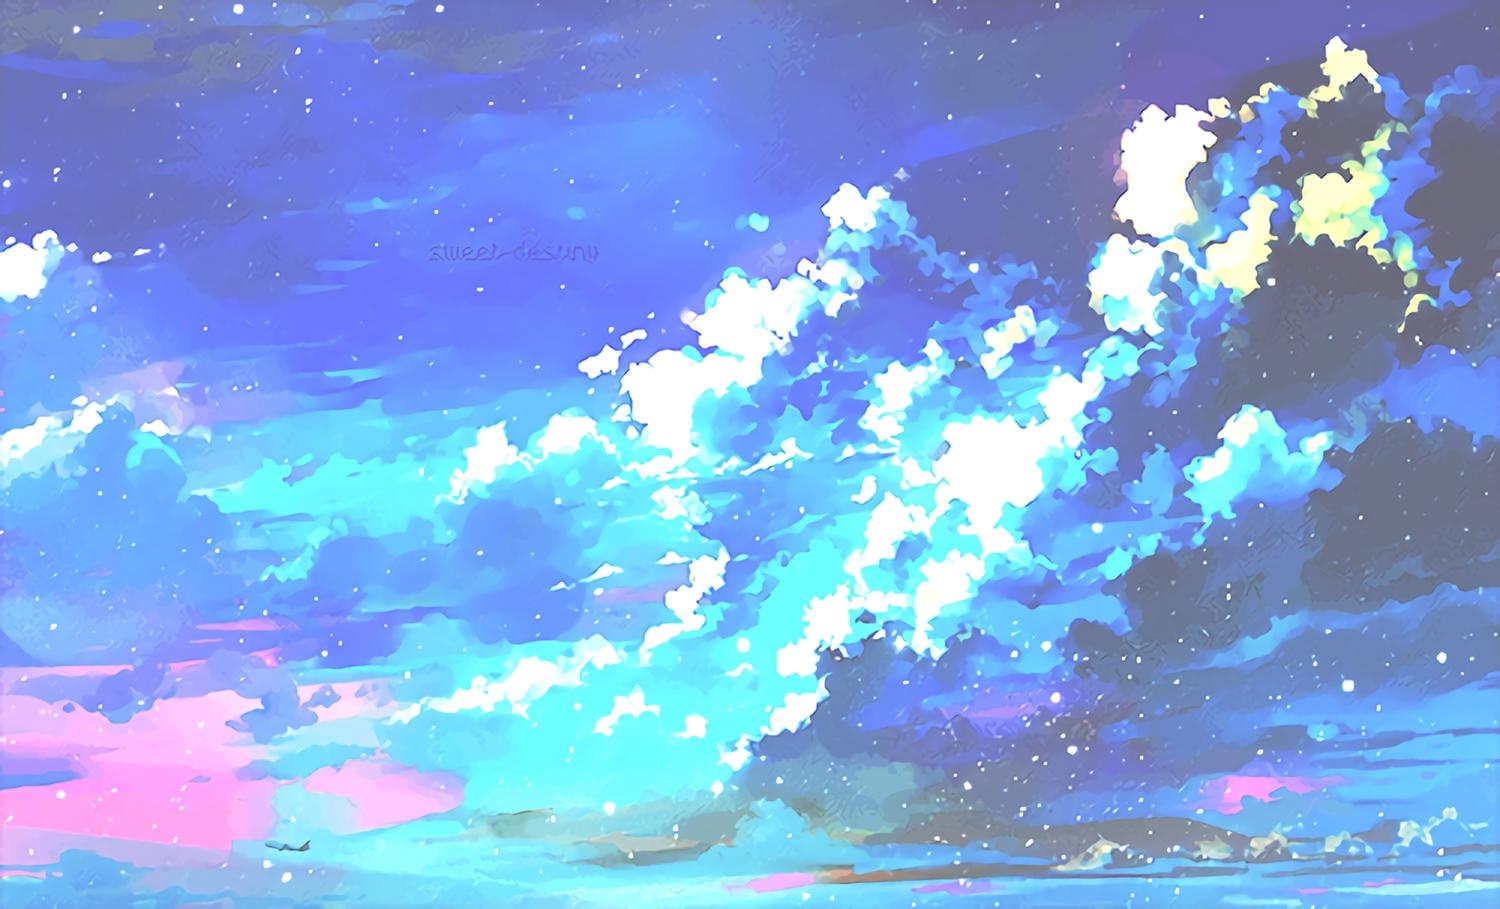 11,097 Anime Sky Background Images, Stock Photos & Vectors | Shutterstock